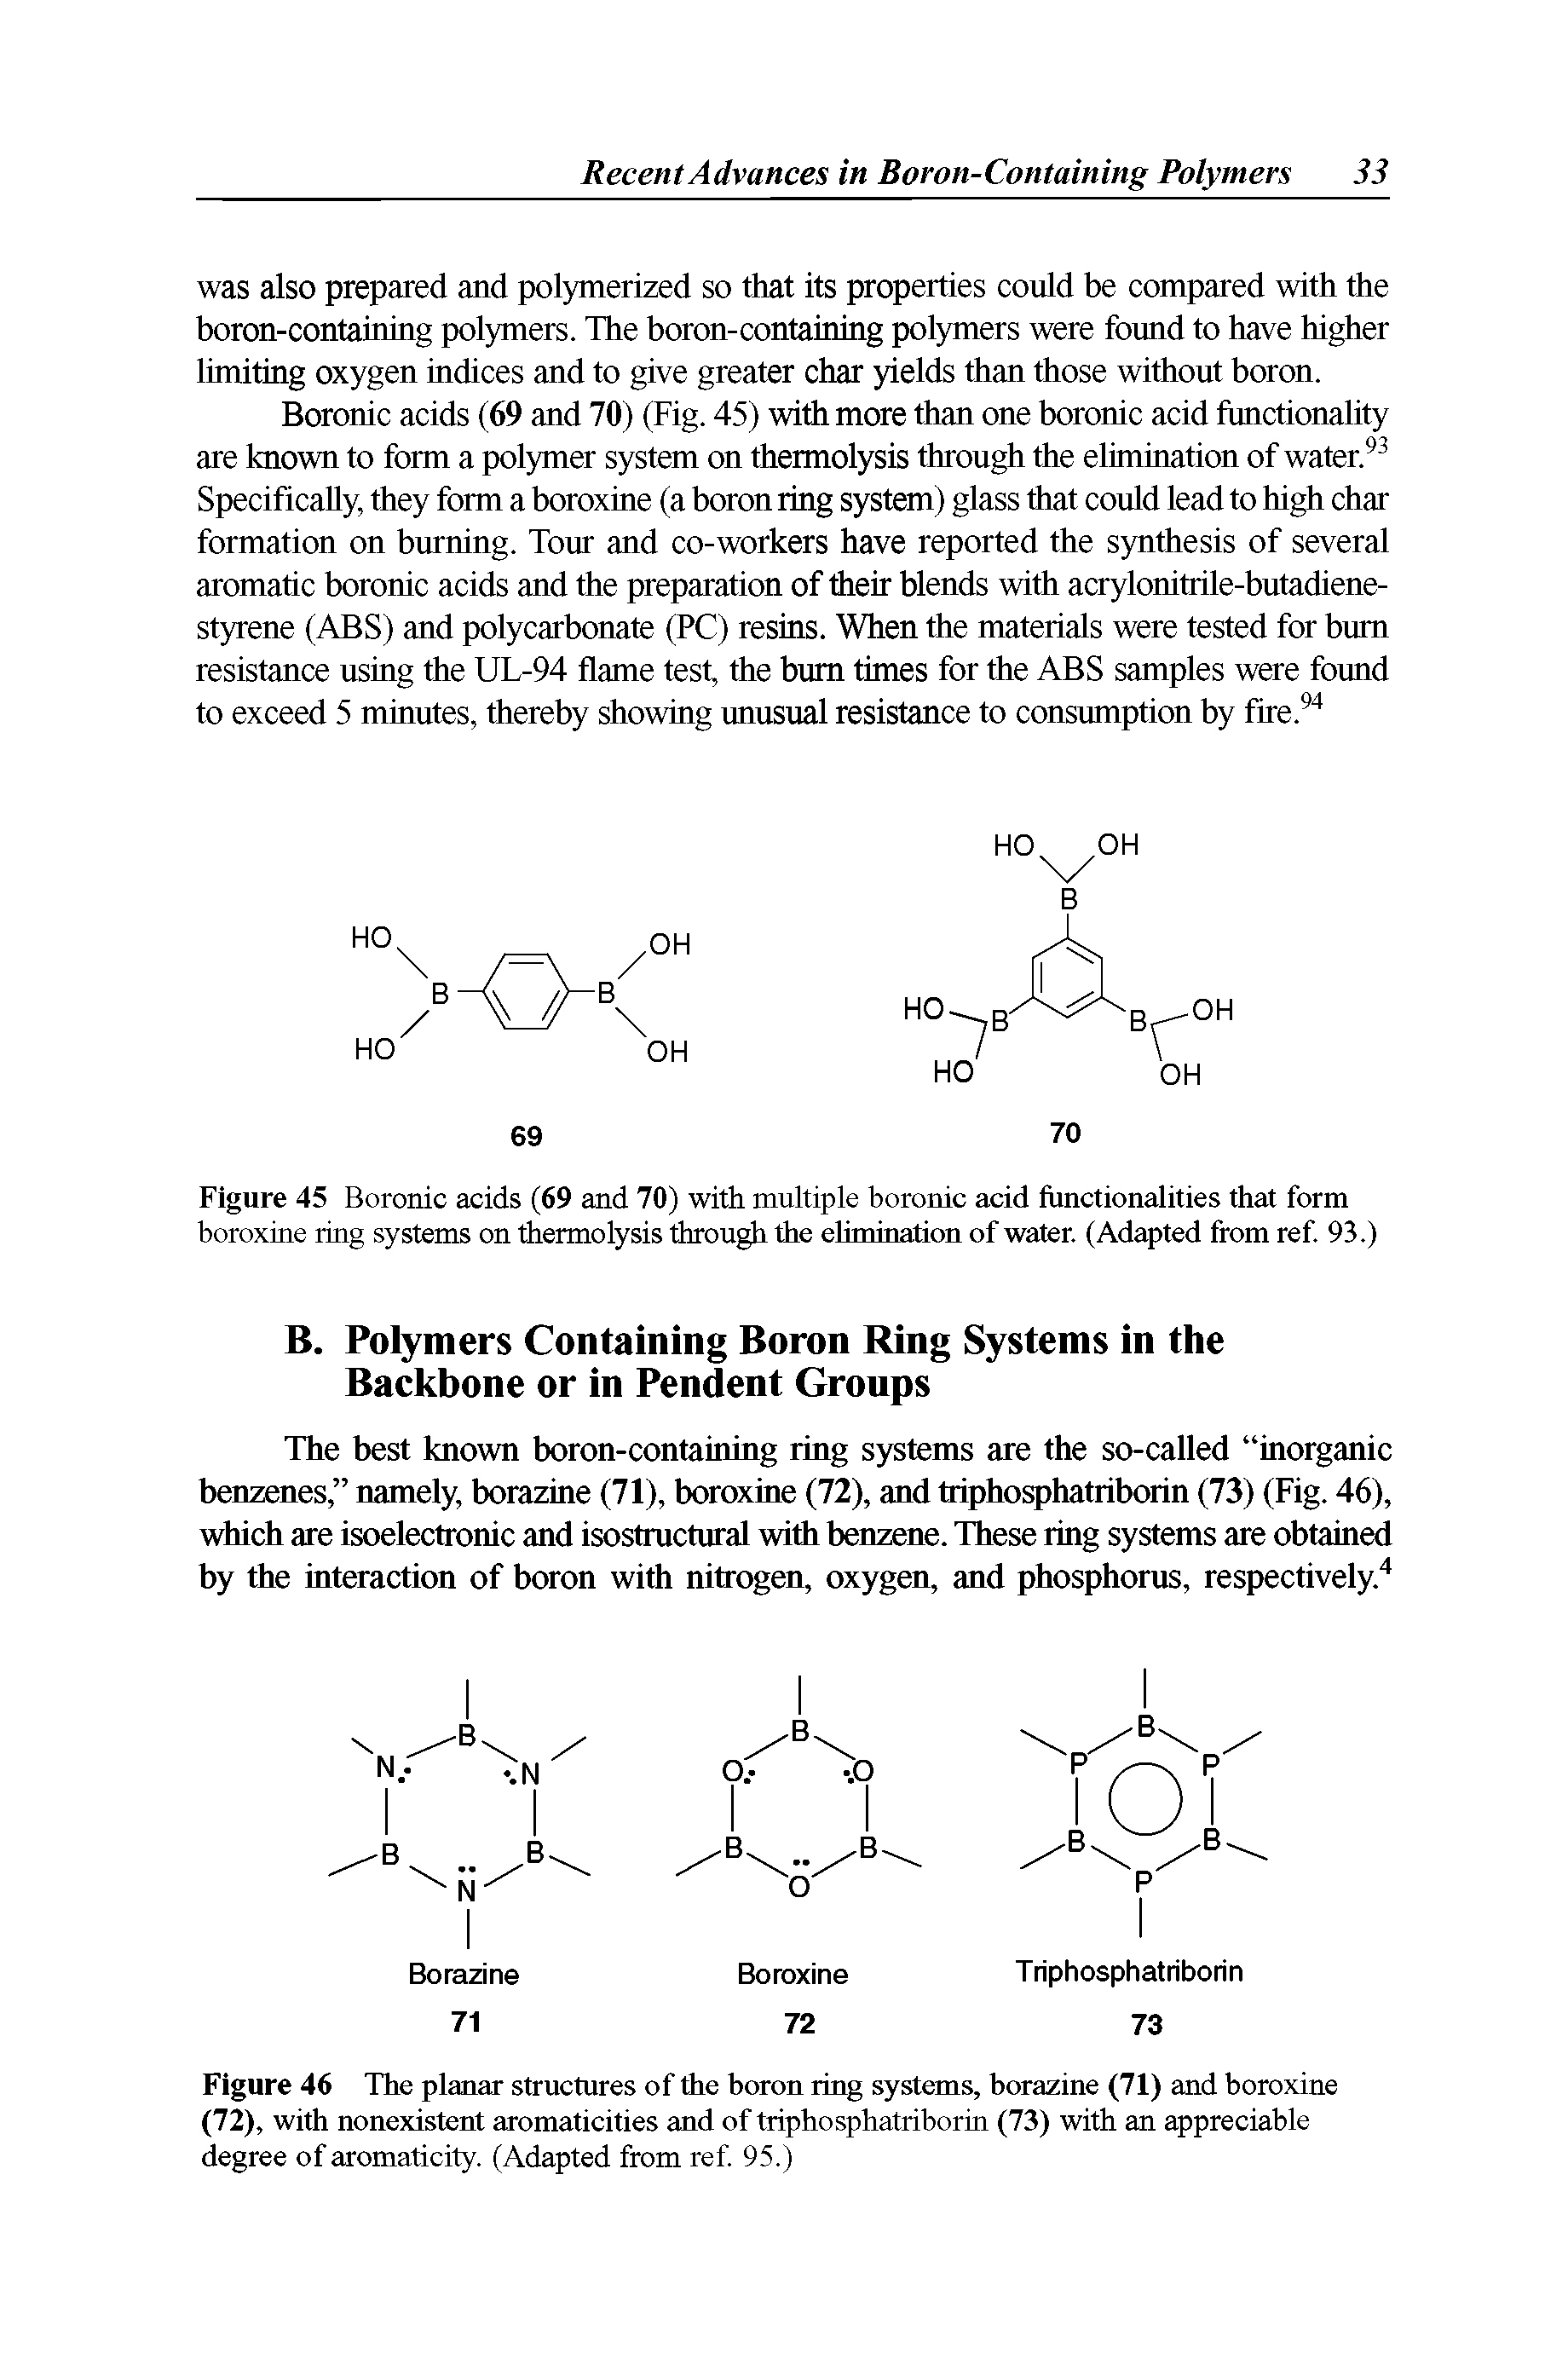 Figure 45 Boronic acids (69 and 70) with multiple boronic acid functionalities that form boroxine ring systems on thermolysis through the elimination of water. (Adapted from ref. 93.)...